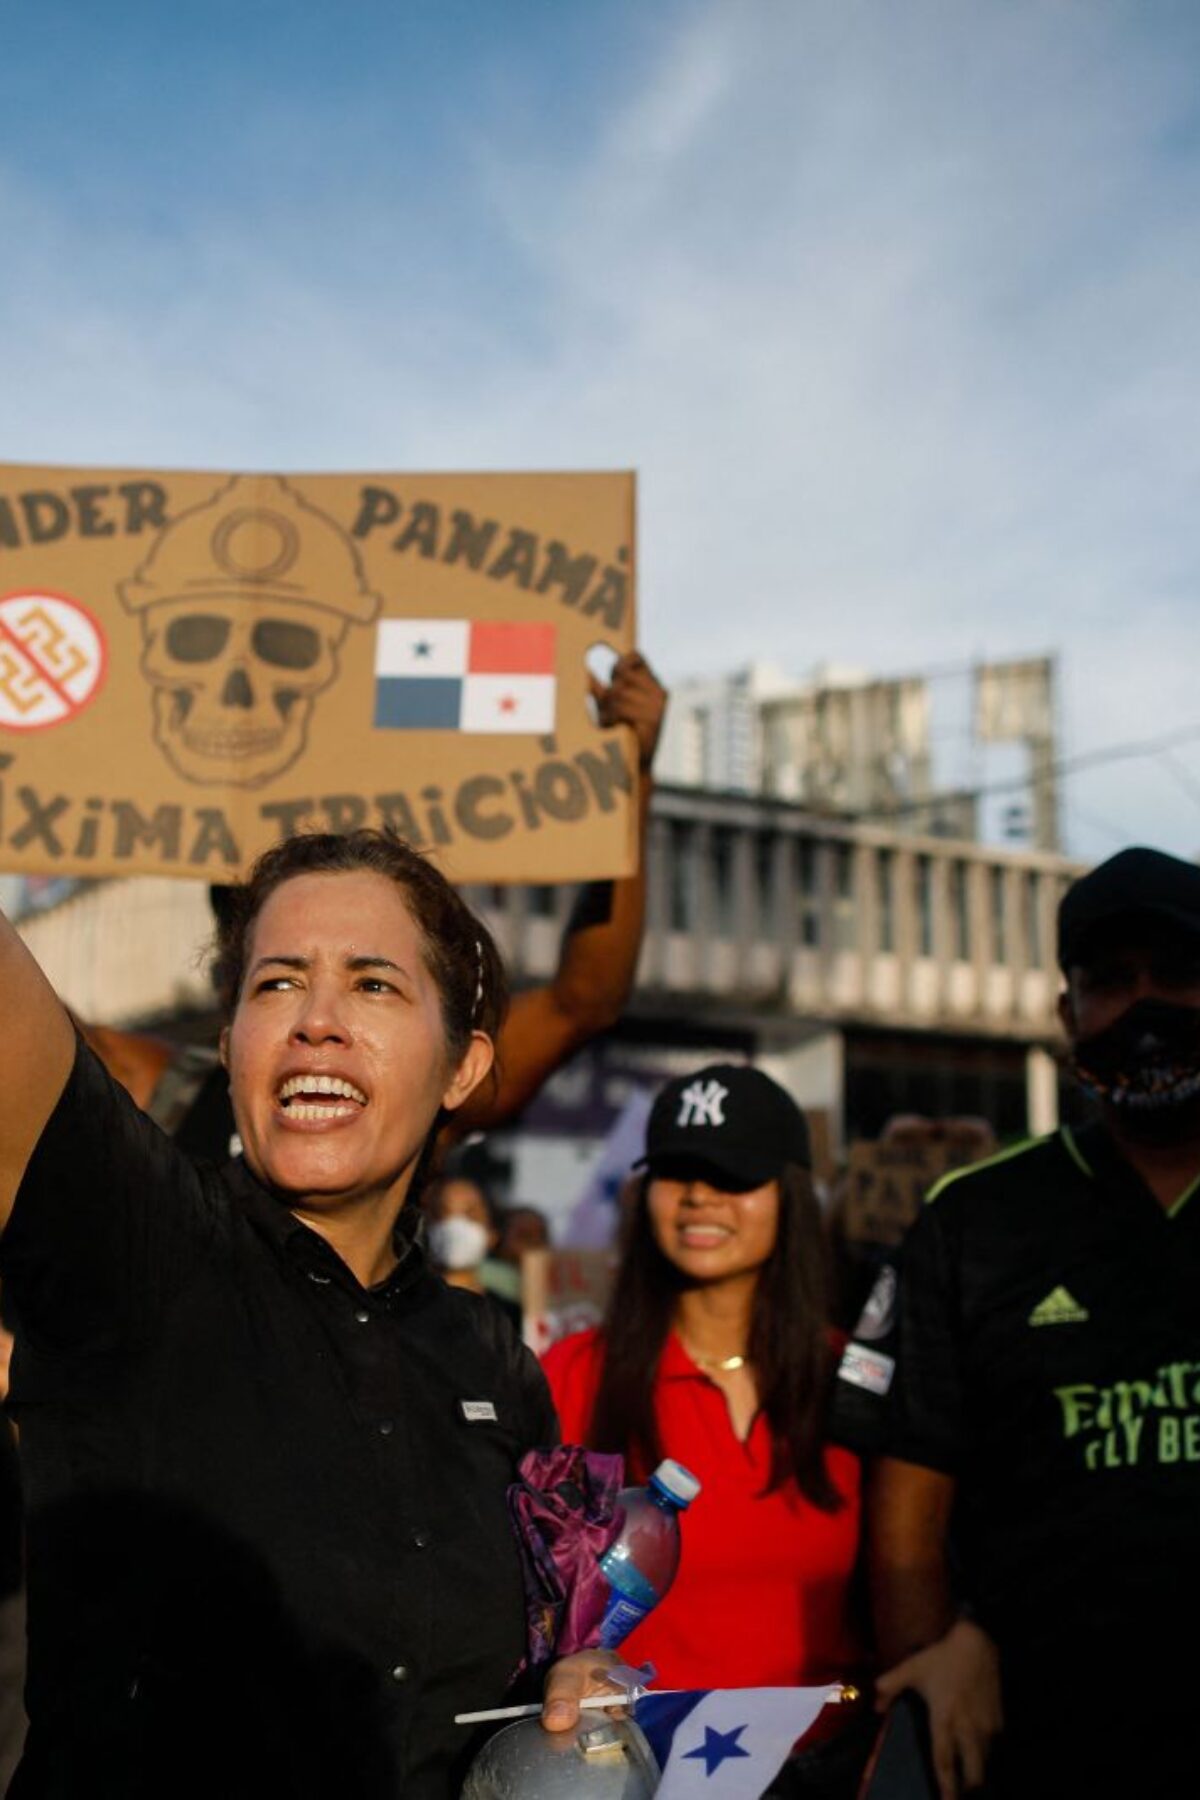 Demonstrators take part in a protest against the contract for the Canadian mining company FQM, in front of the National Assembly in Panama City on October 23, 2023. The National Assembly of Panama approved a bill with Minera Panama, a subsidiary of Canadian First Quantum Minerals (FQM), to exploit the largest open-pit copper mine in Central America, while protests continue in rejection of that controversial pact. (Photo by ROBERTO CISNEROS / AFP) (Photo by ROBERTO CISNEROS/AFP via Getty Images)